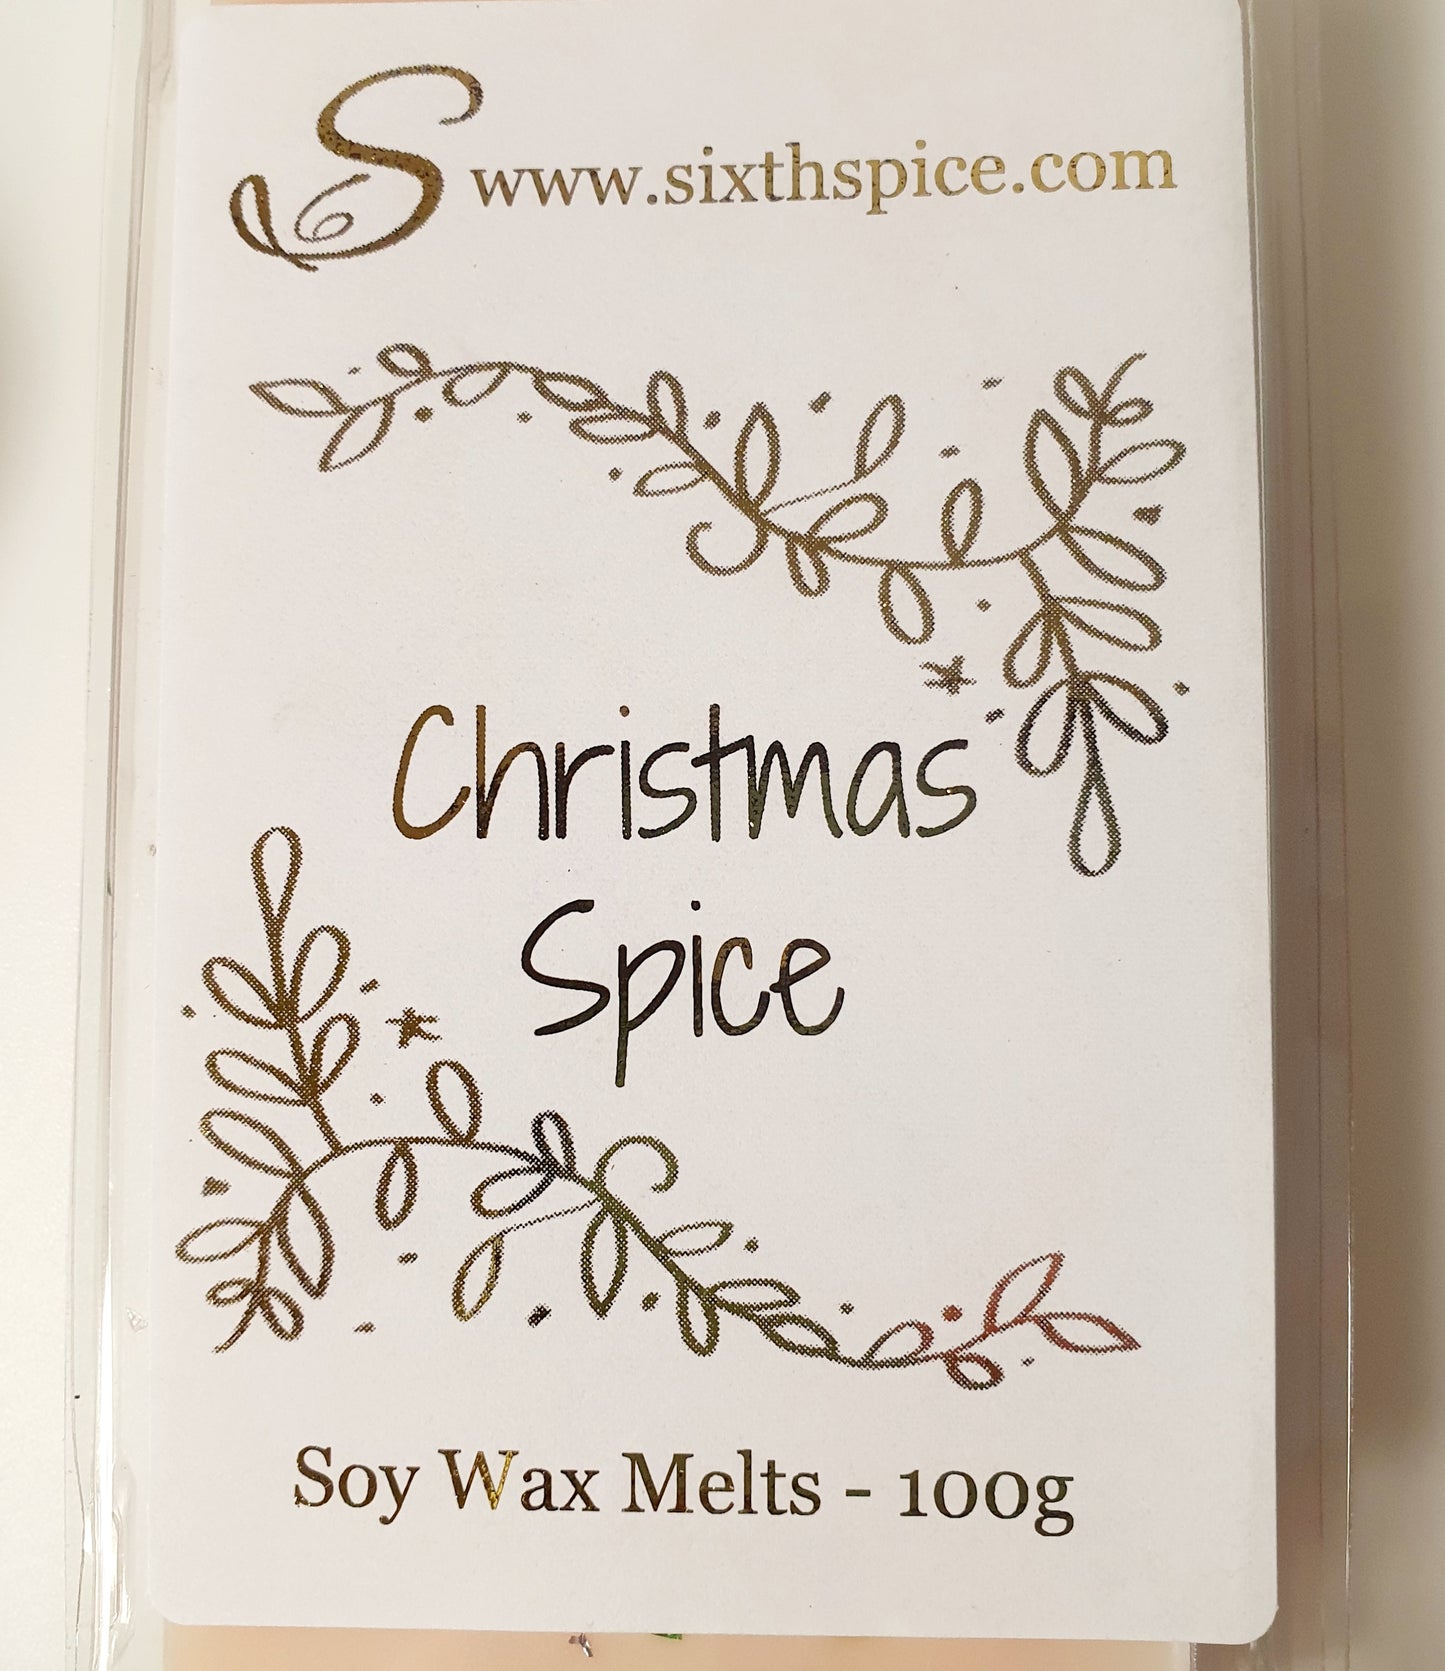 Christmas Spice - Soy Wax Melts